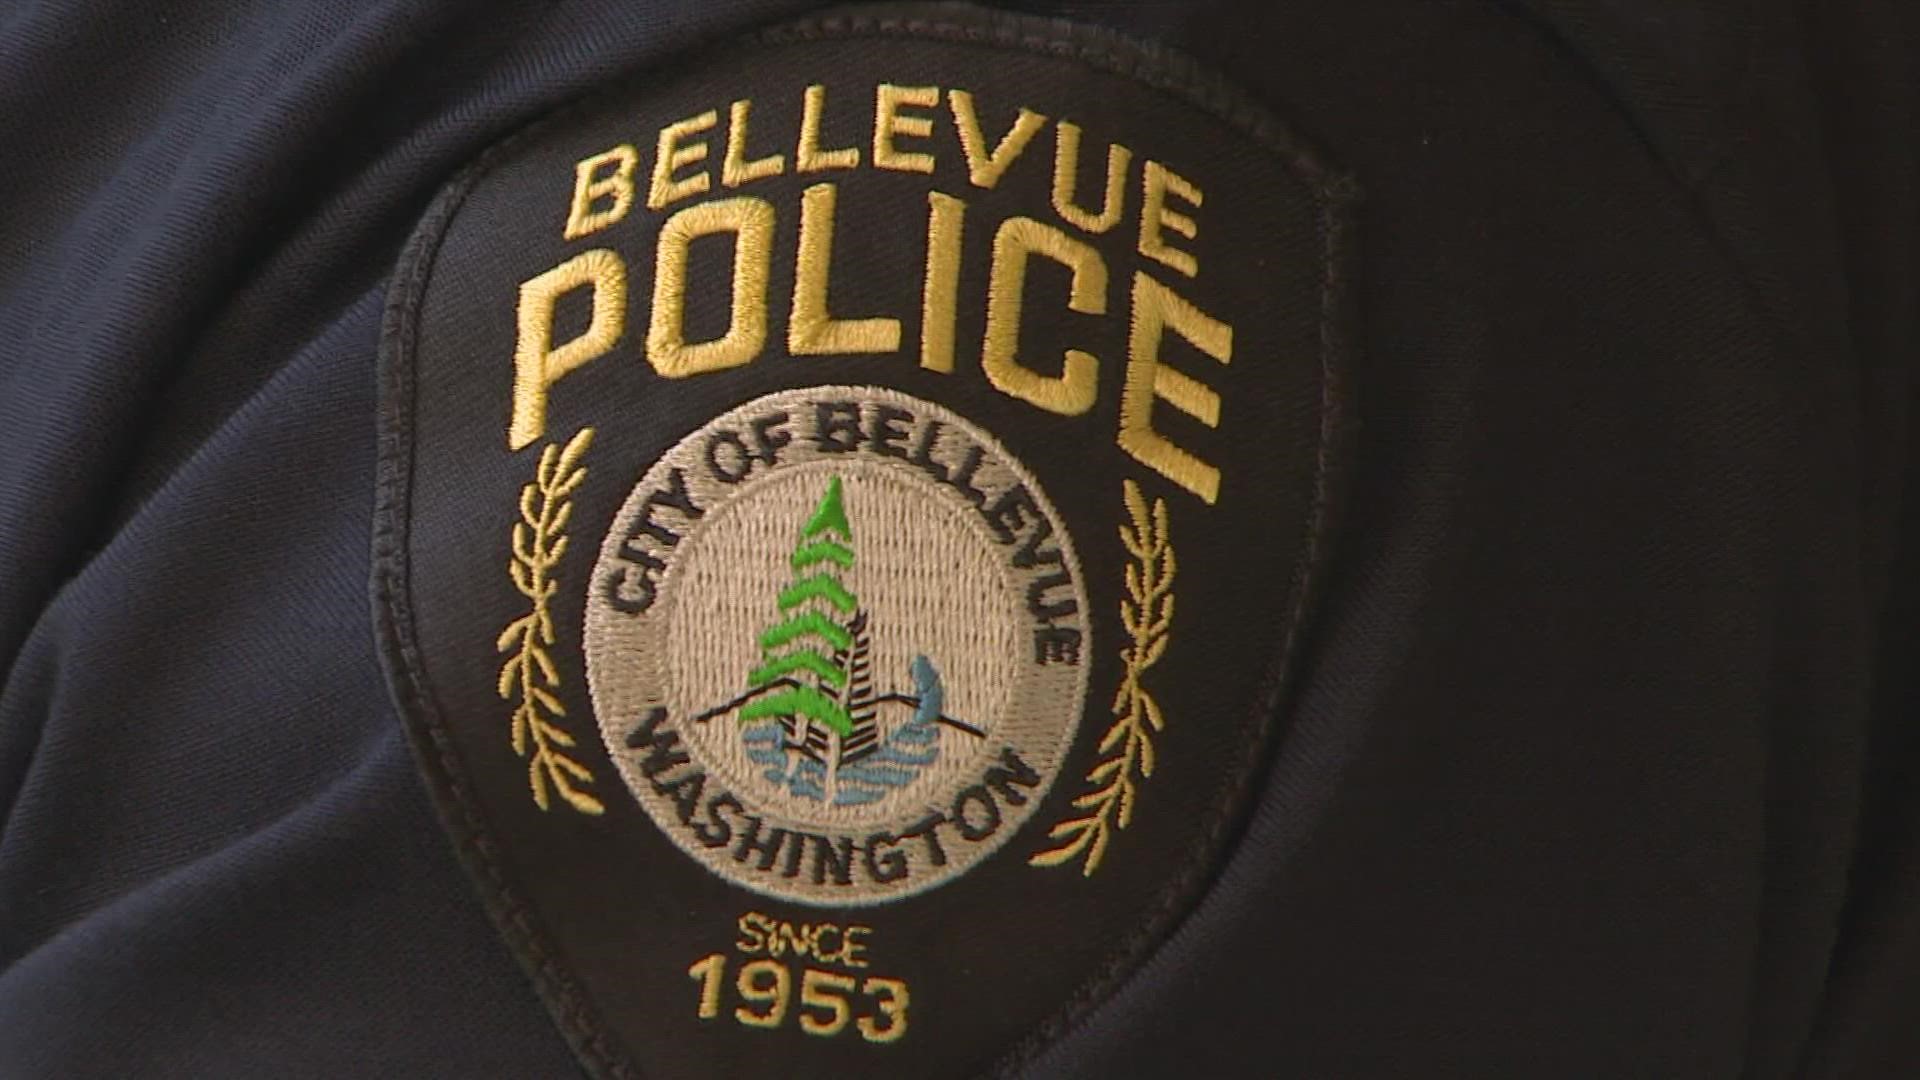 Bellevue police are reporting a 22% uptick in property crime. Bellevue police are cracking down on crime by upping patrols in “hot spots.”